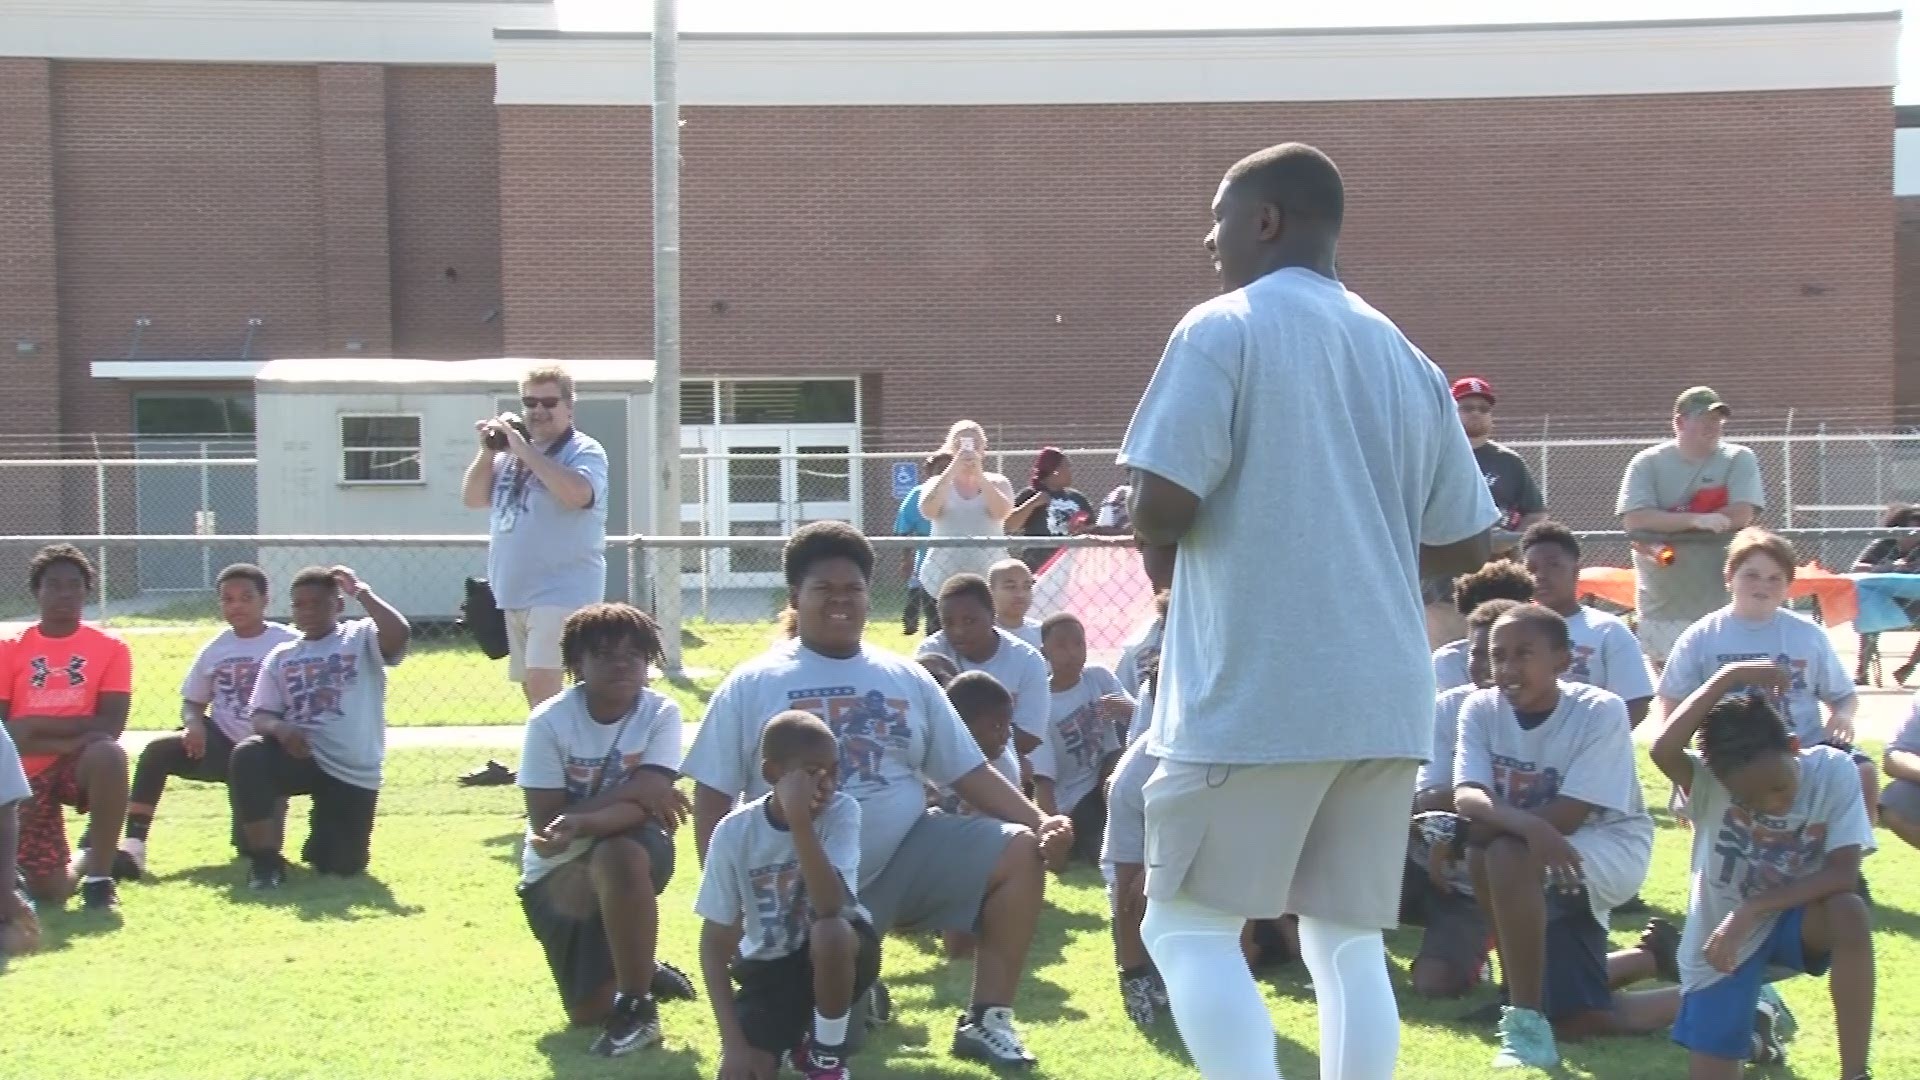 More than 200 children were at the stadium for Roquan Smith's football camp. The NFL linebacker plans to return home every summer to spend time coaching in Montezuma